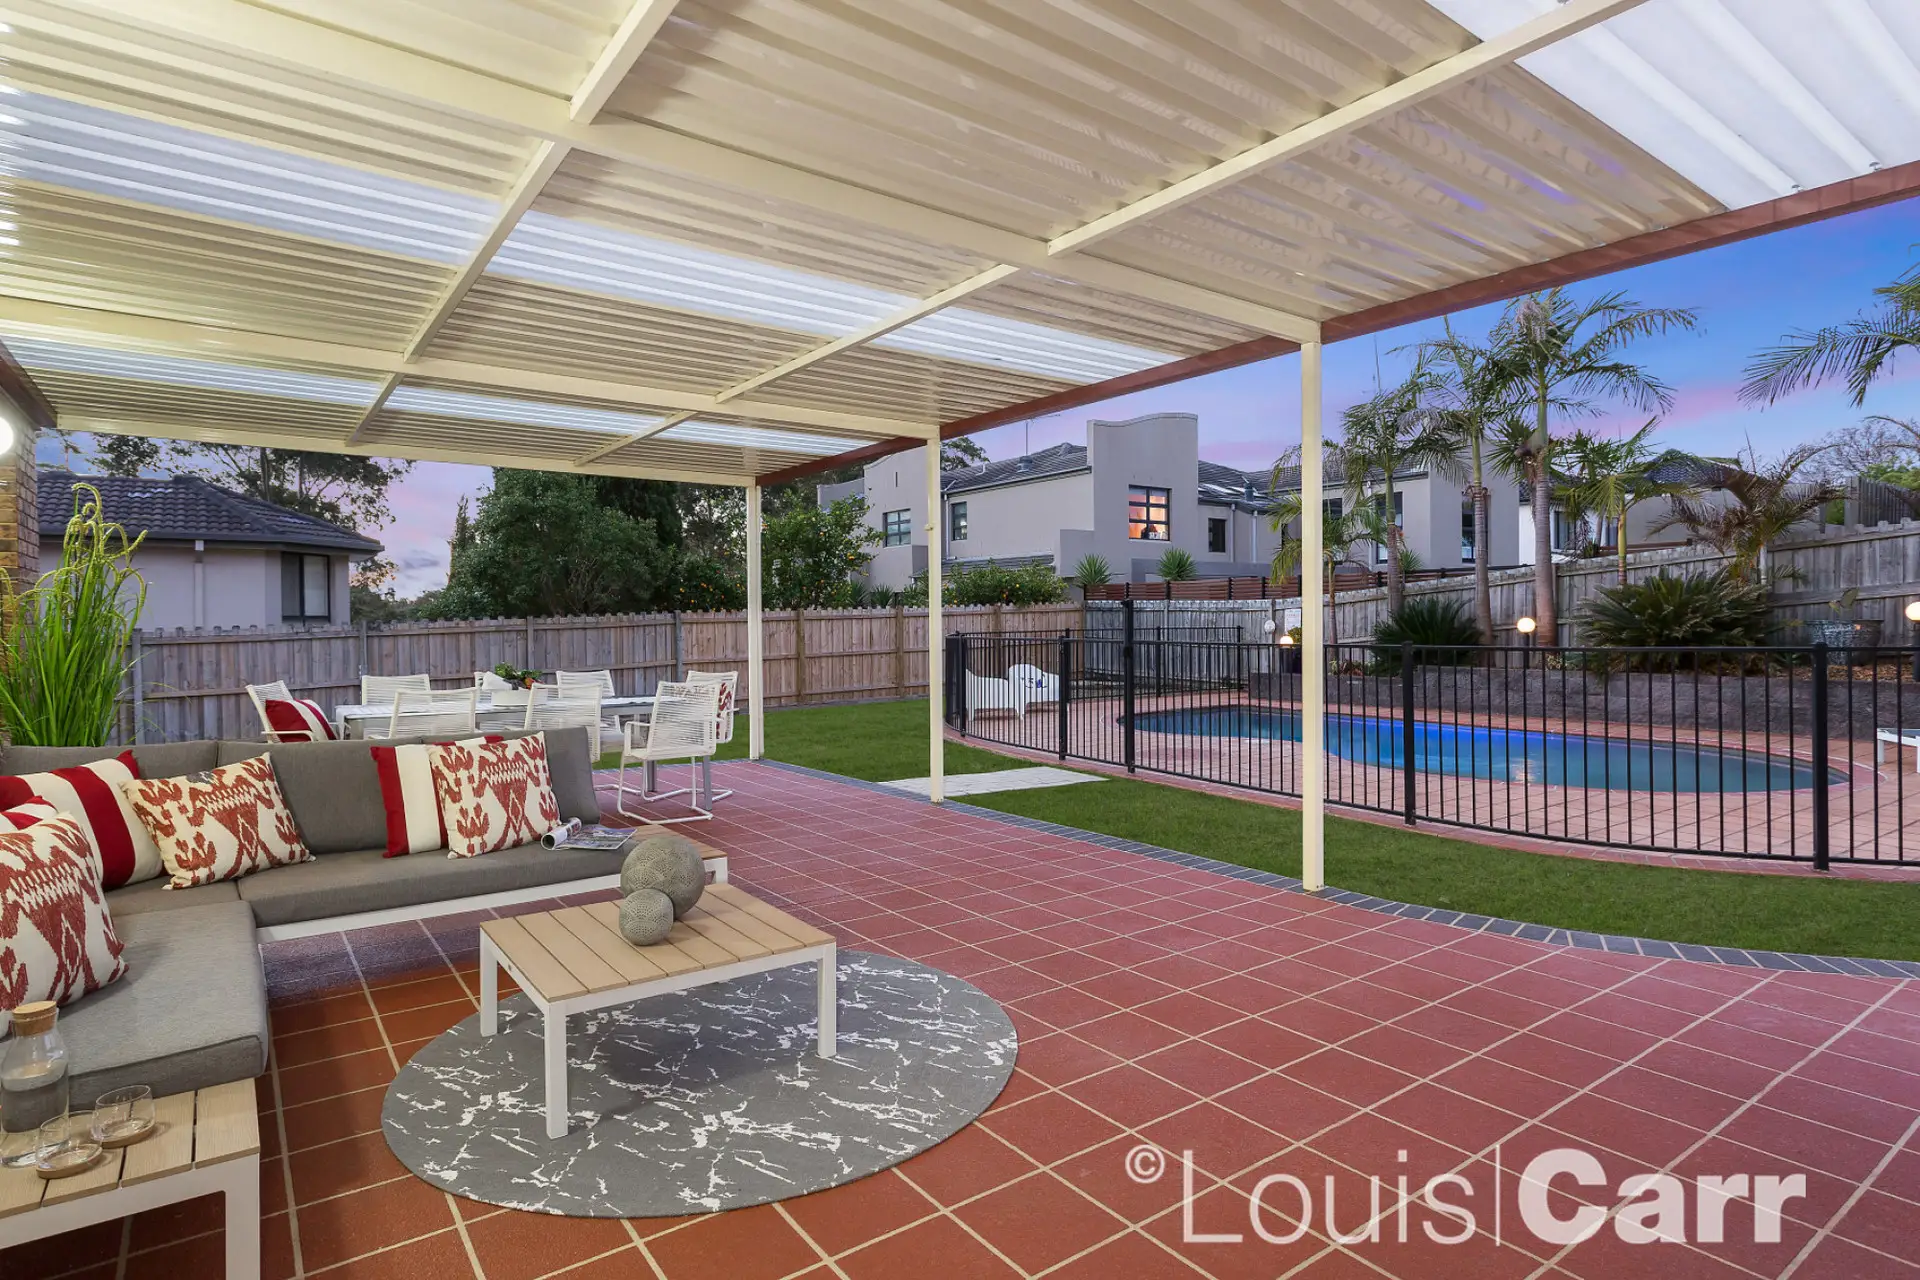 Photo #9: 9 Hermitage Avenue, Kellyville - Sold by Louis Carr Real Estate